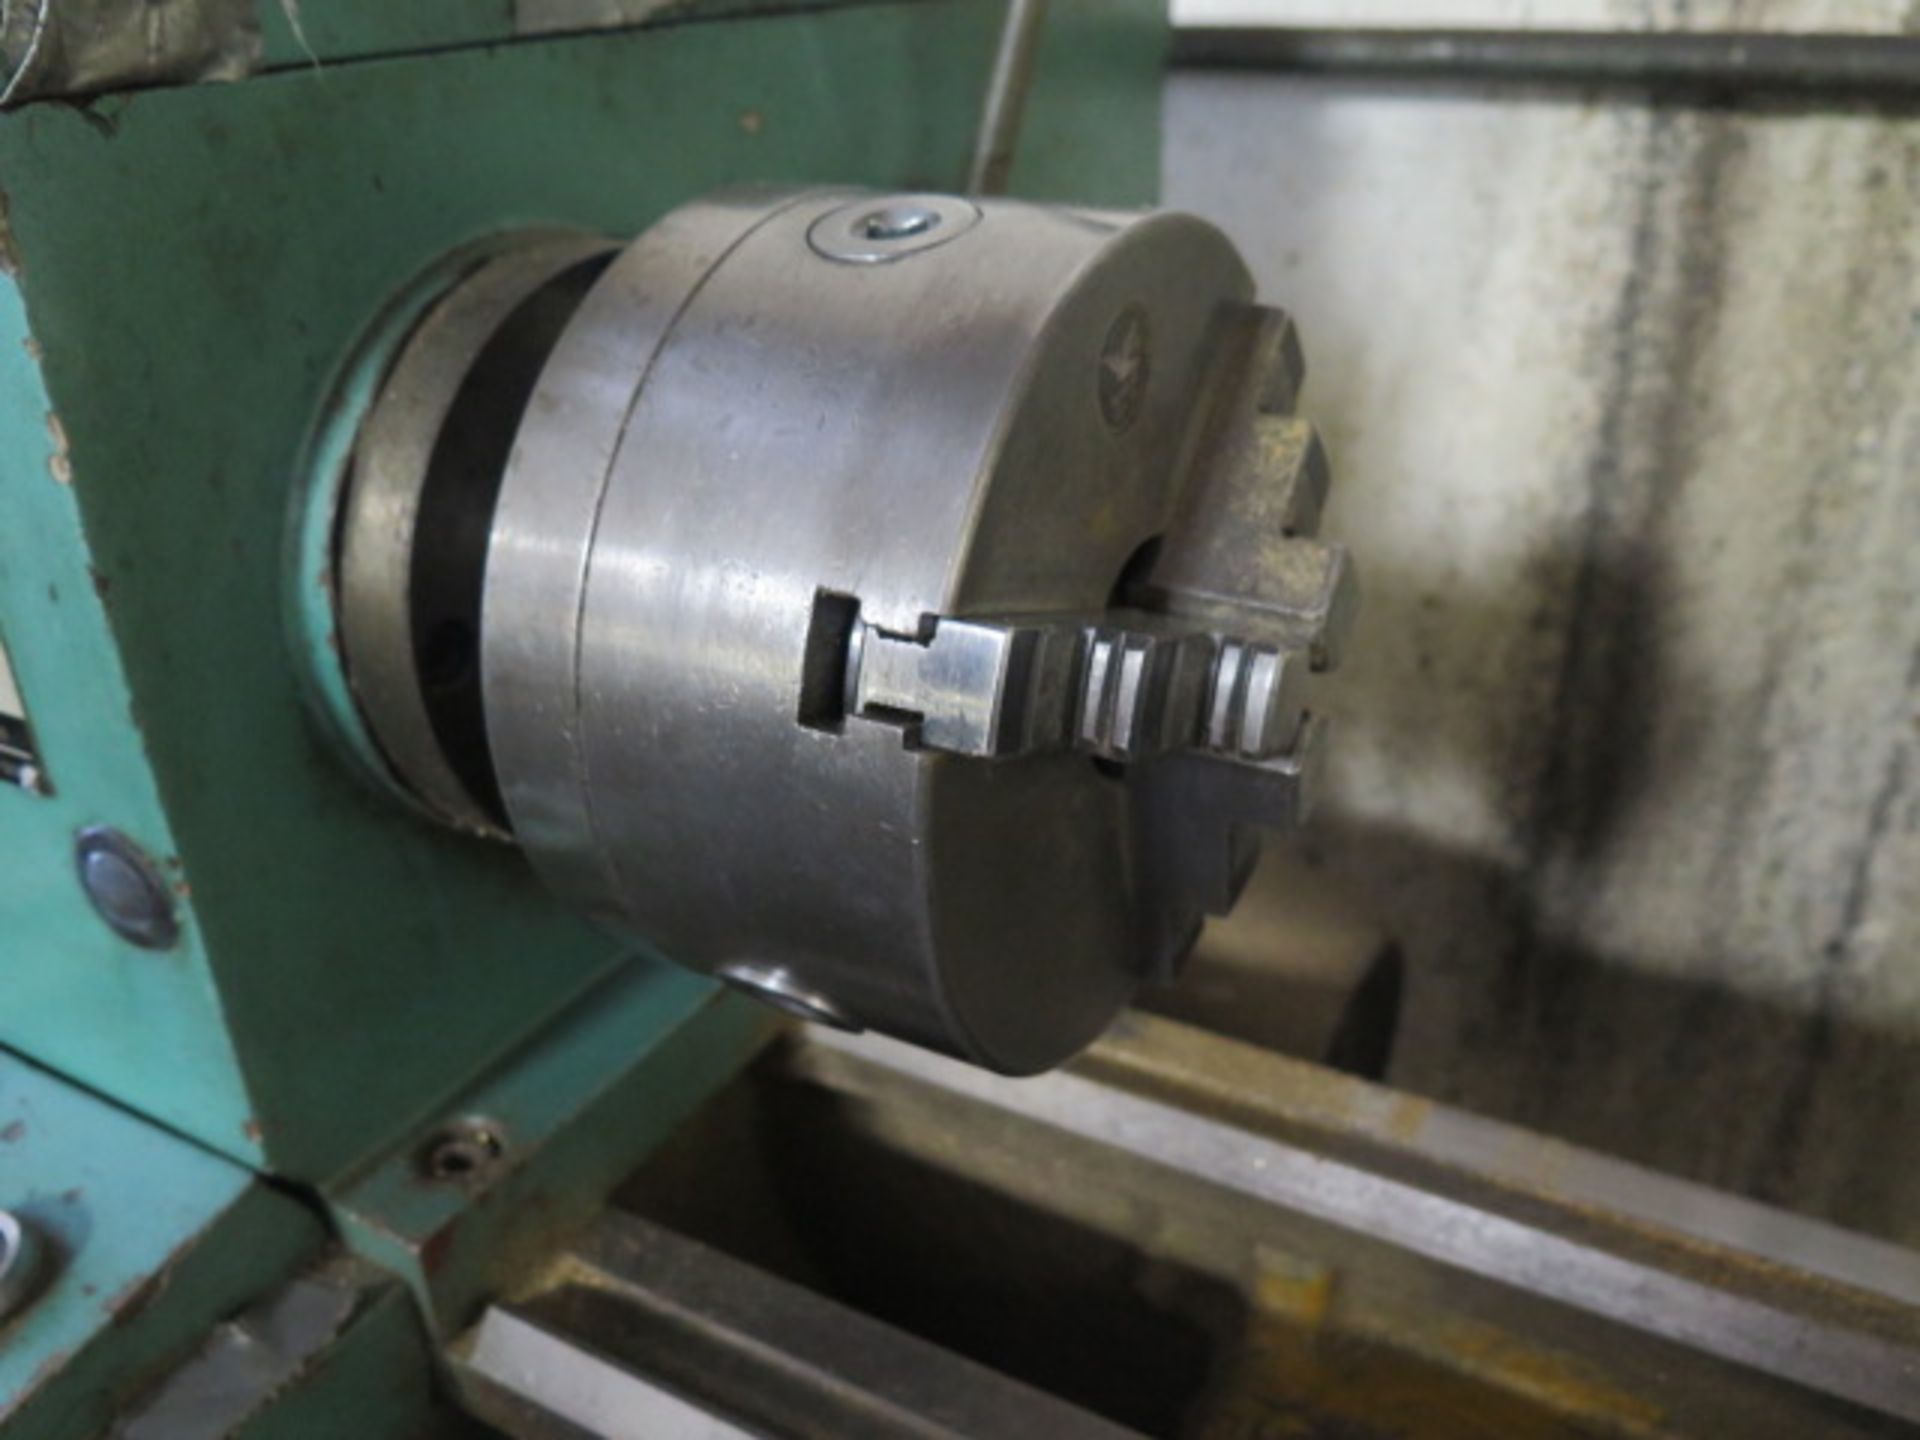 Chizhou mdl. CZ300 11 ½” x 24” Lathe s/n 0101 w/ 50-1200 RPM, Inch/mm Thread, Tailstock, SOLD AS IS - Image 7 of 12